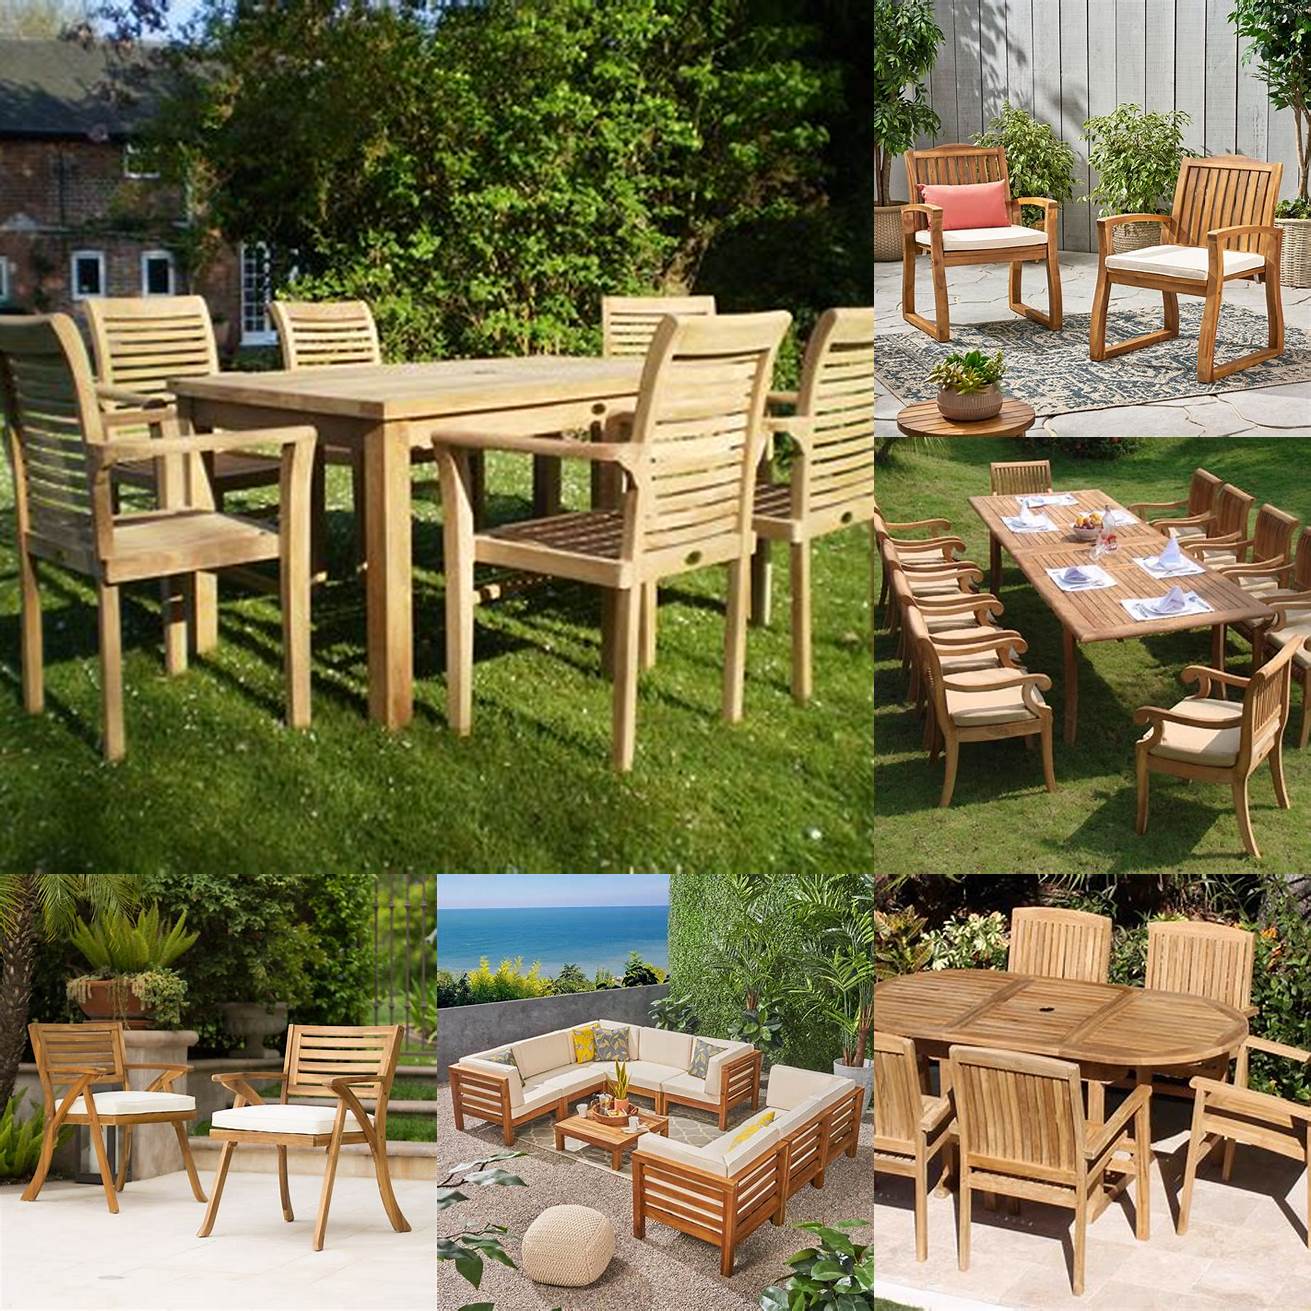 Outdoor furniture made from teak wood